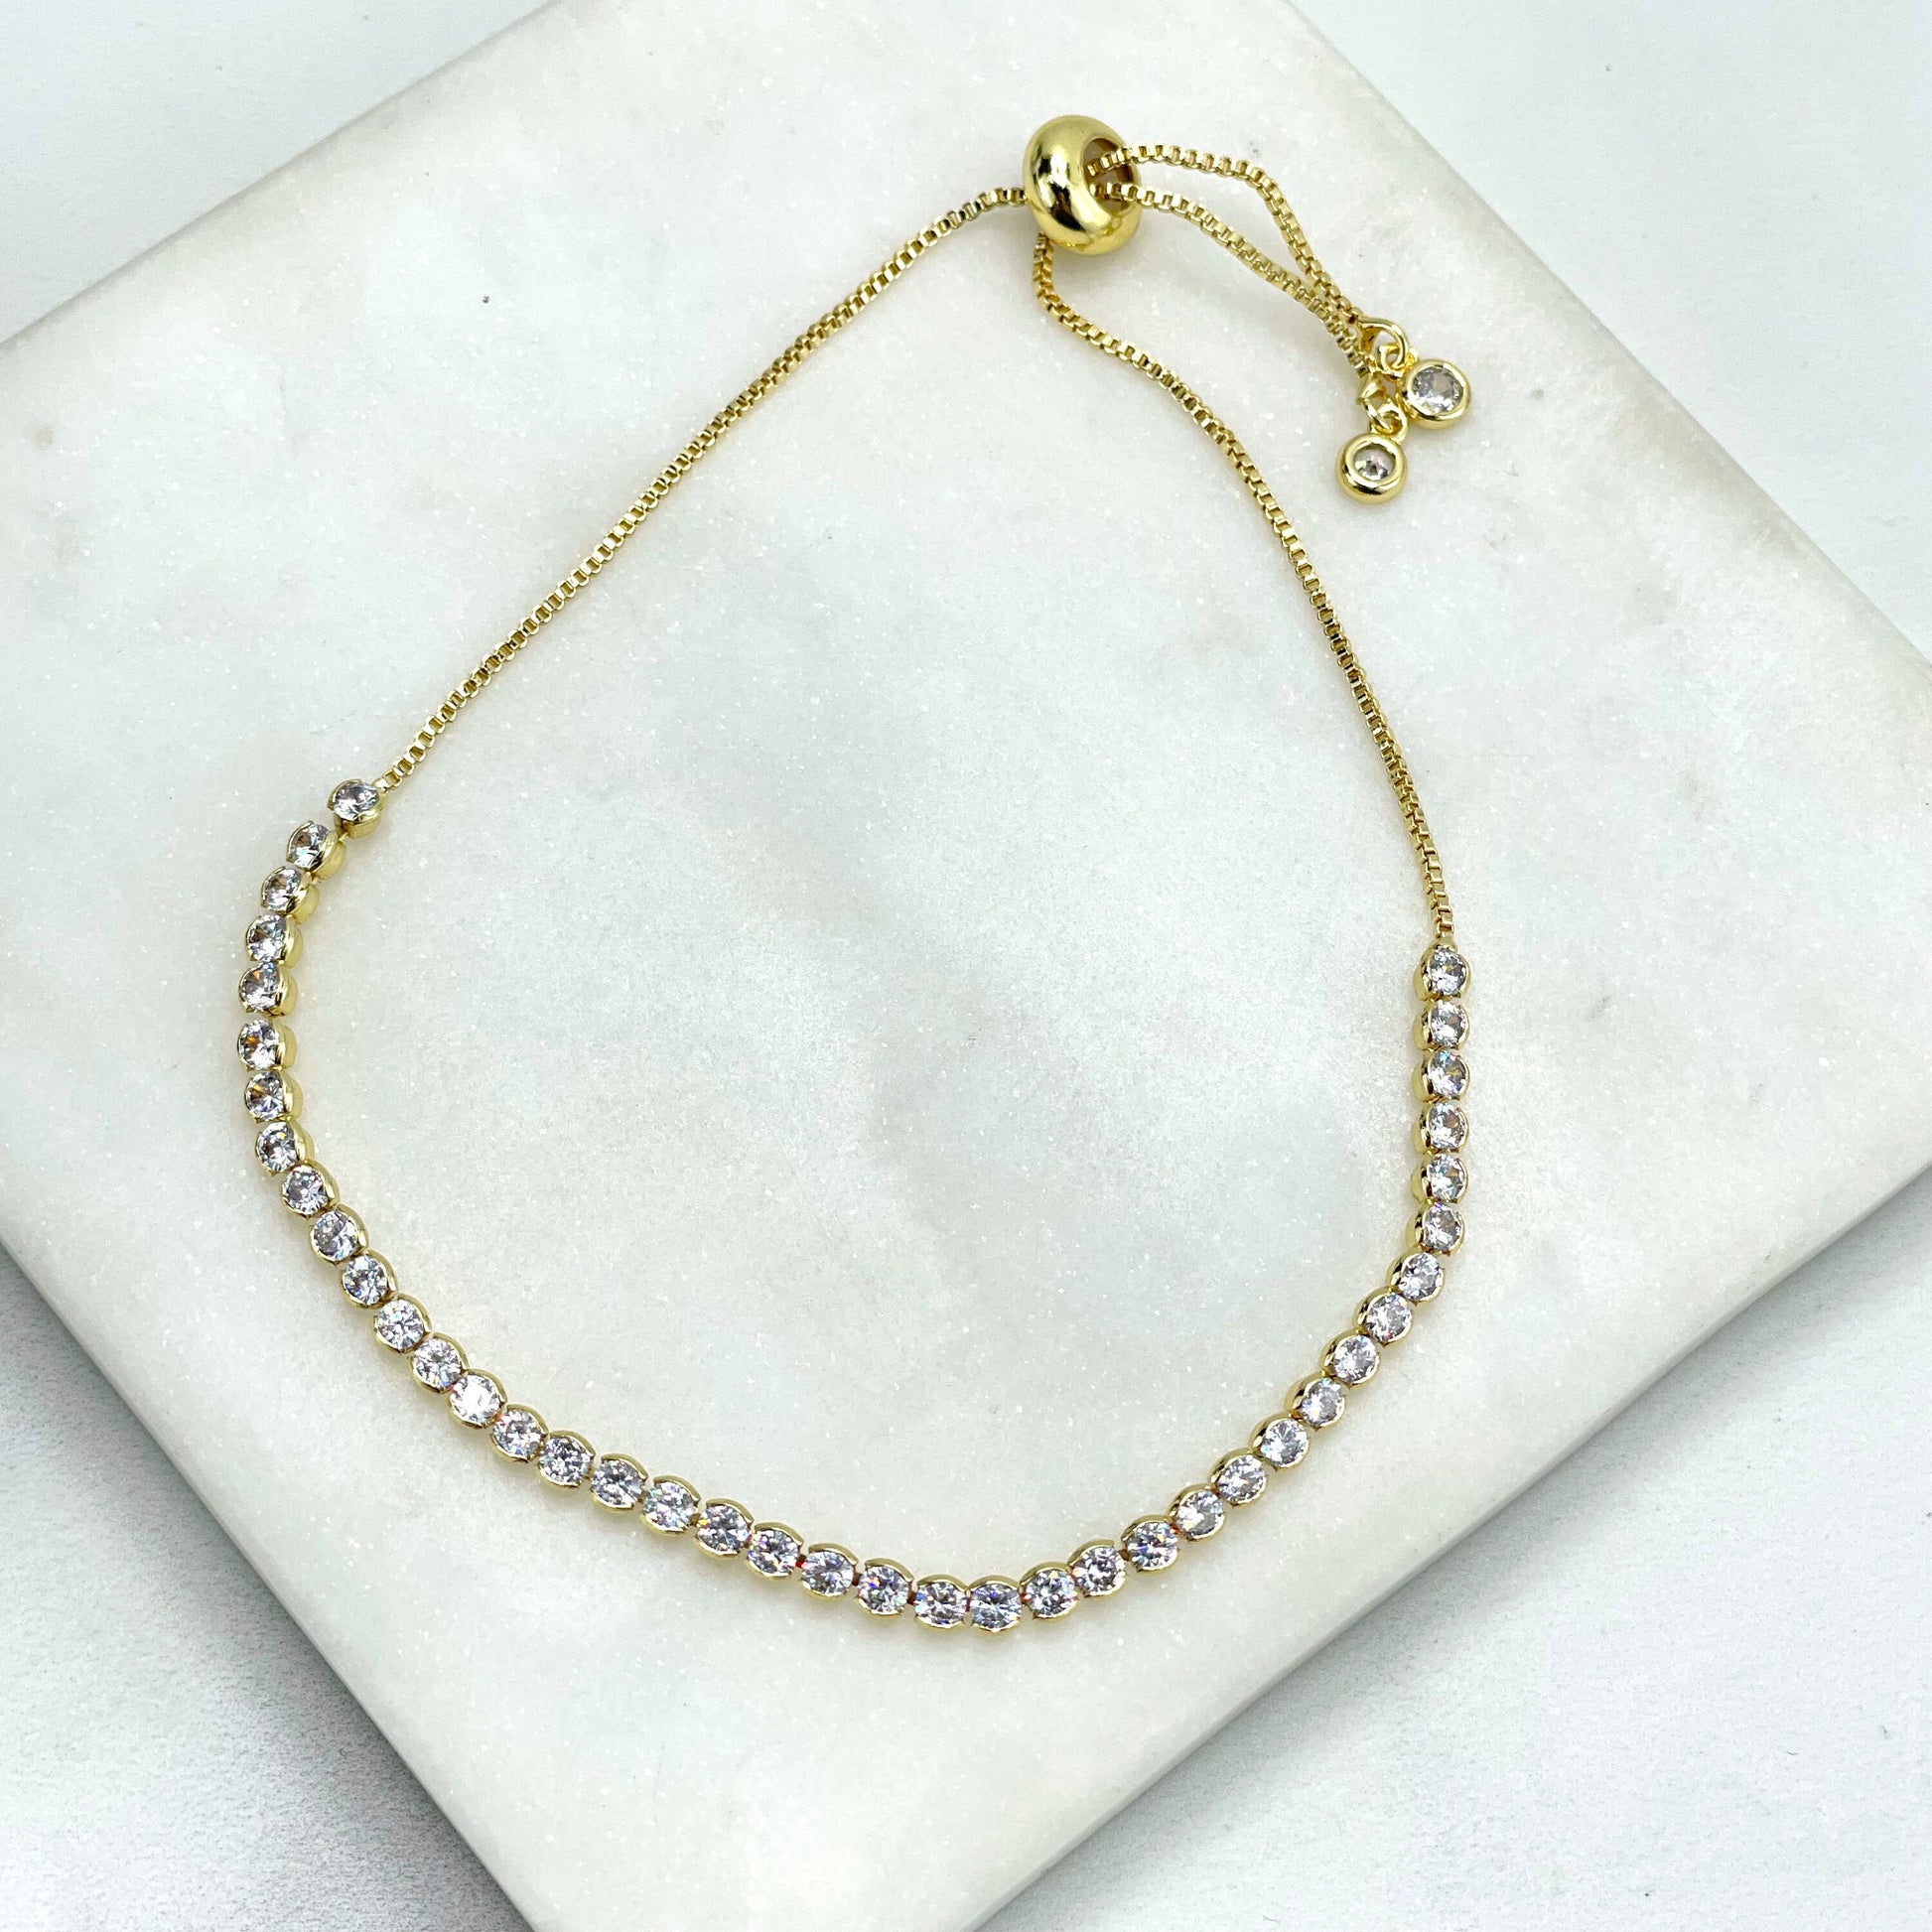 18k Gold Filled Box Chain & Clear Cubic Zirconia Slide Clasp Tennis Linked Bracelet, 3 Different Sizes, Wholesale Jewelry Making Supplies